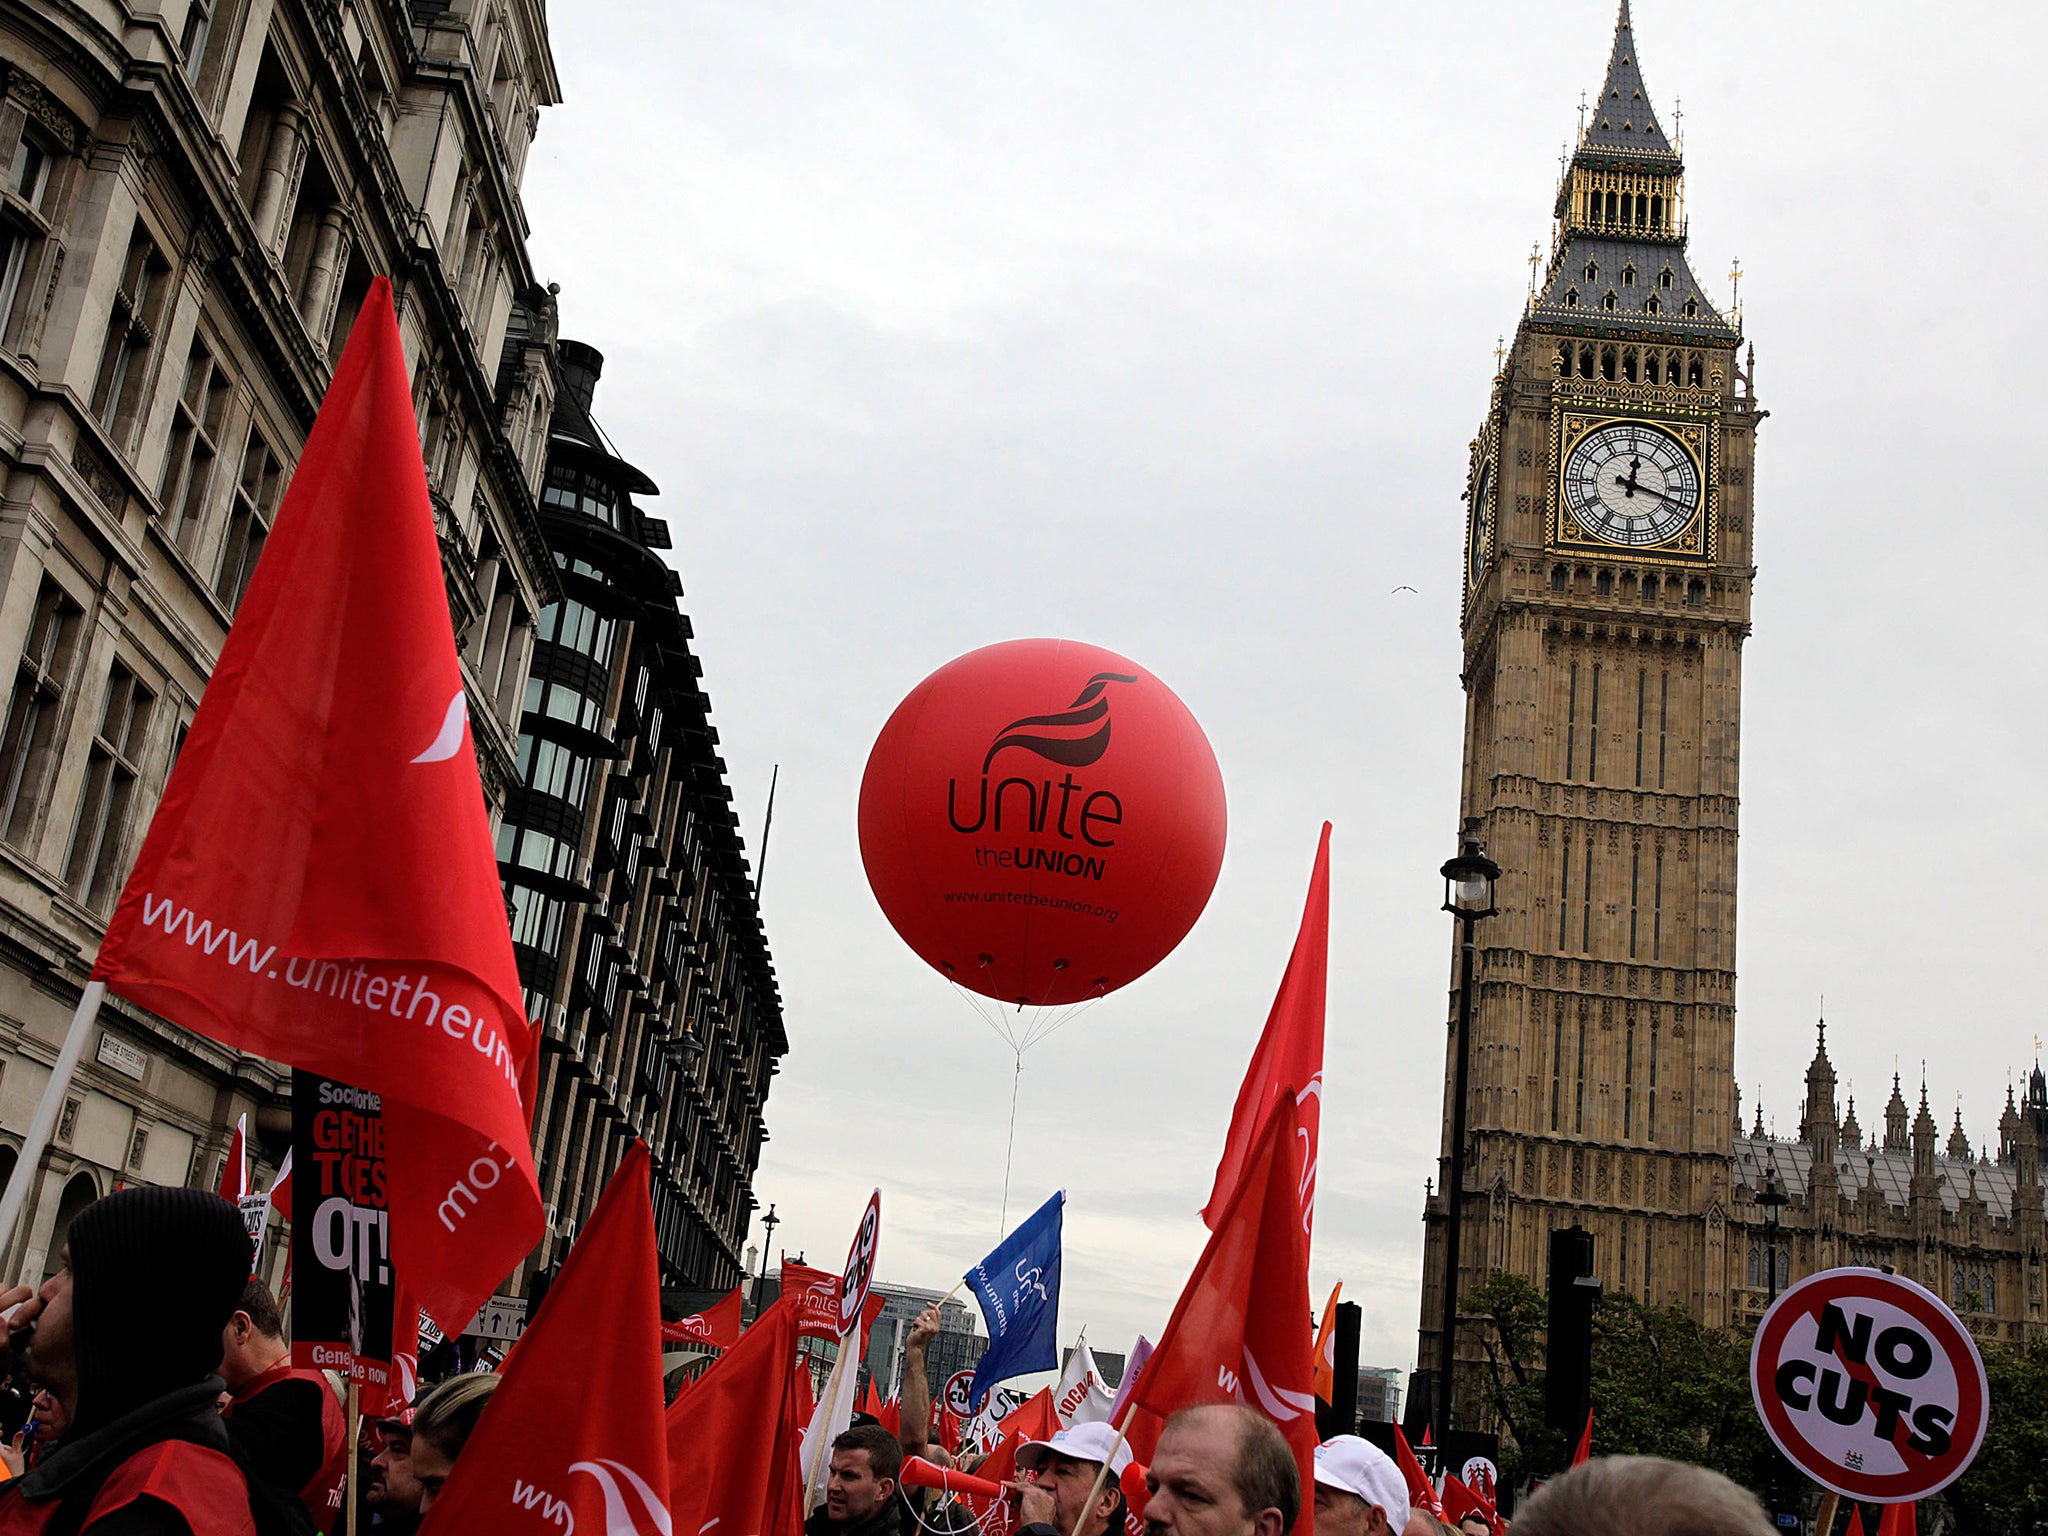 Unite the Union and the GMB have signed a statement calling on the Government to 'maintain British membership in the single market and customs union with all rights and obligations.'